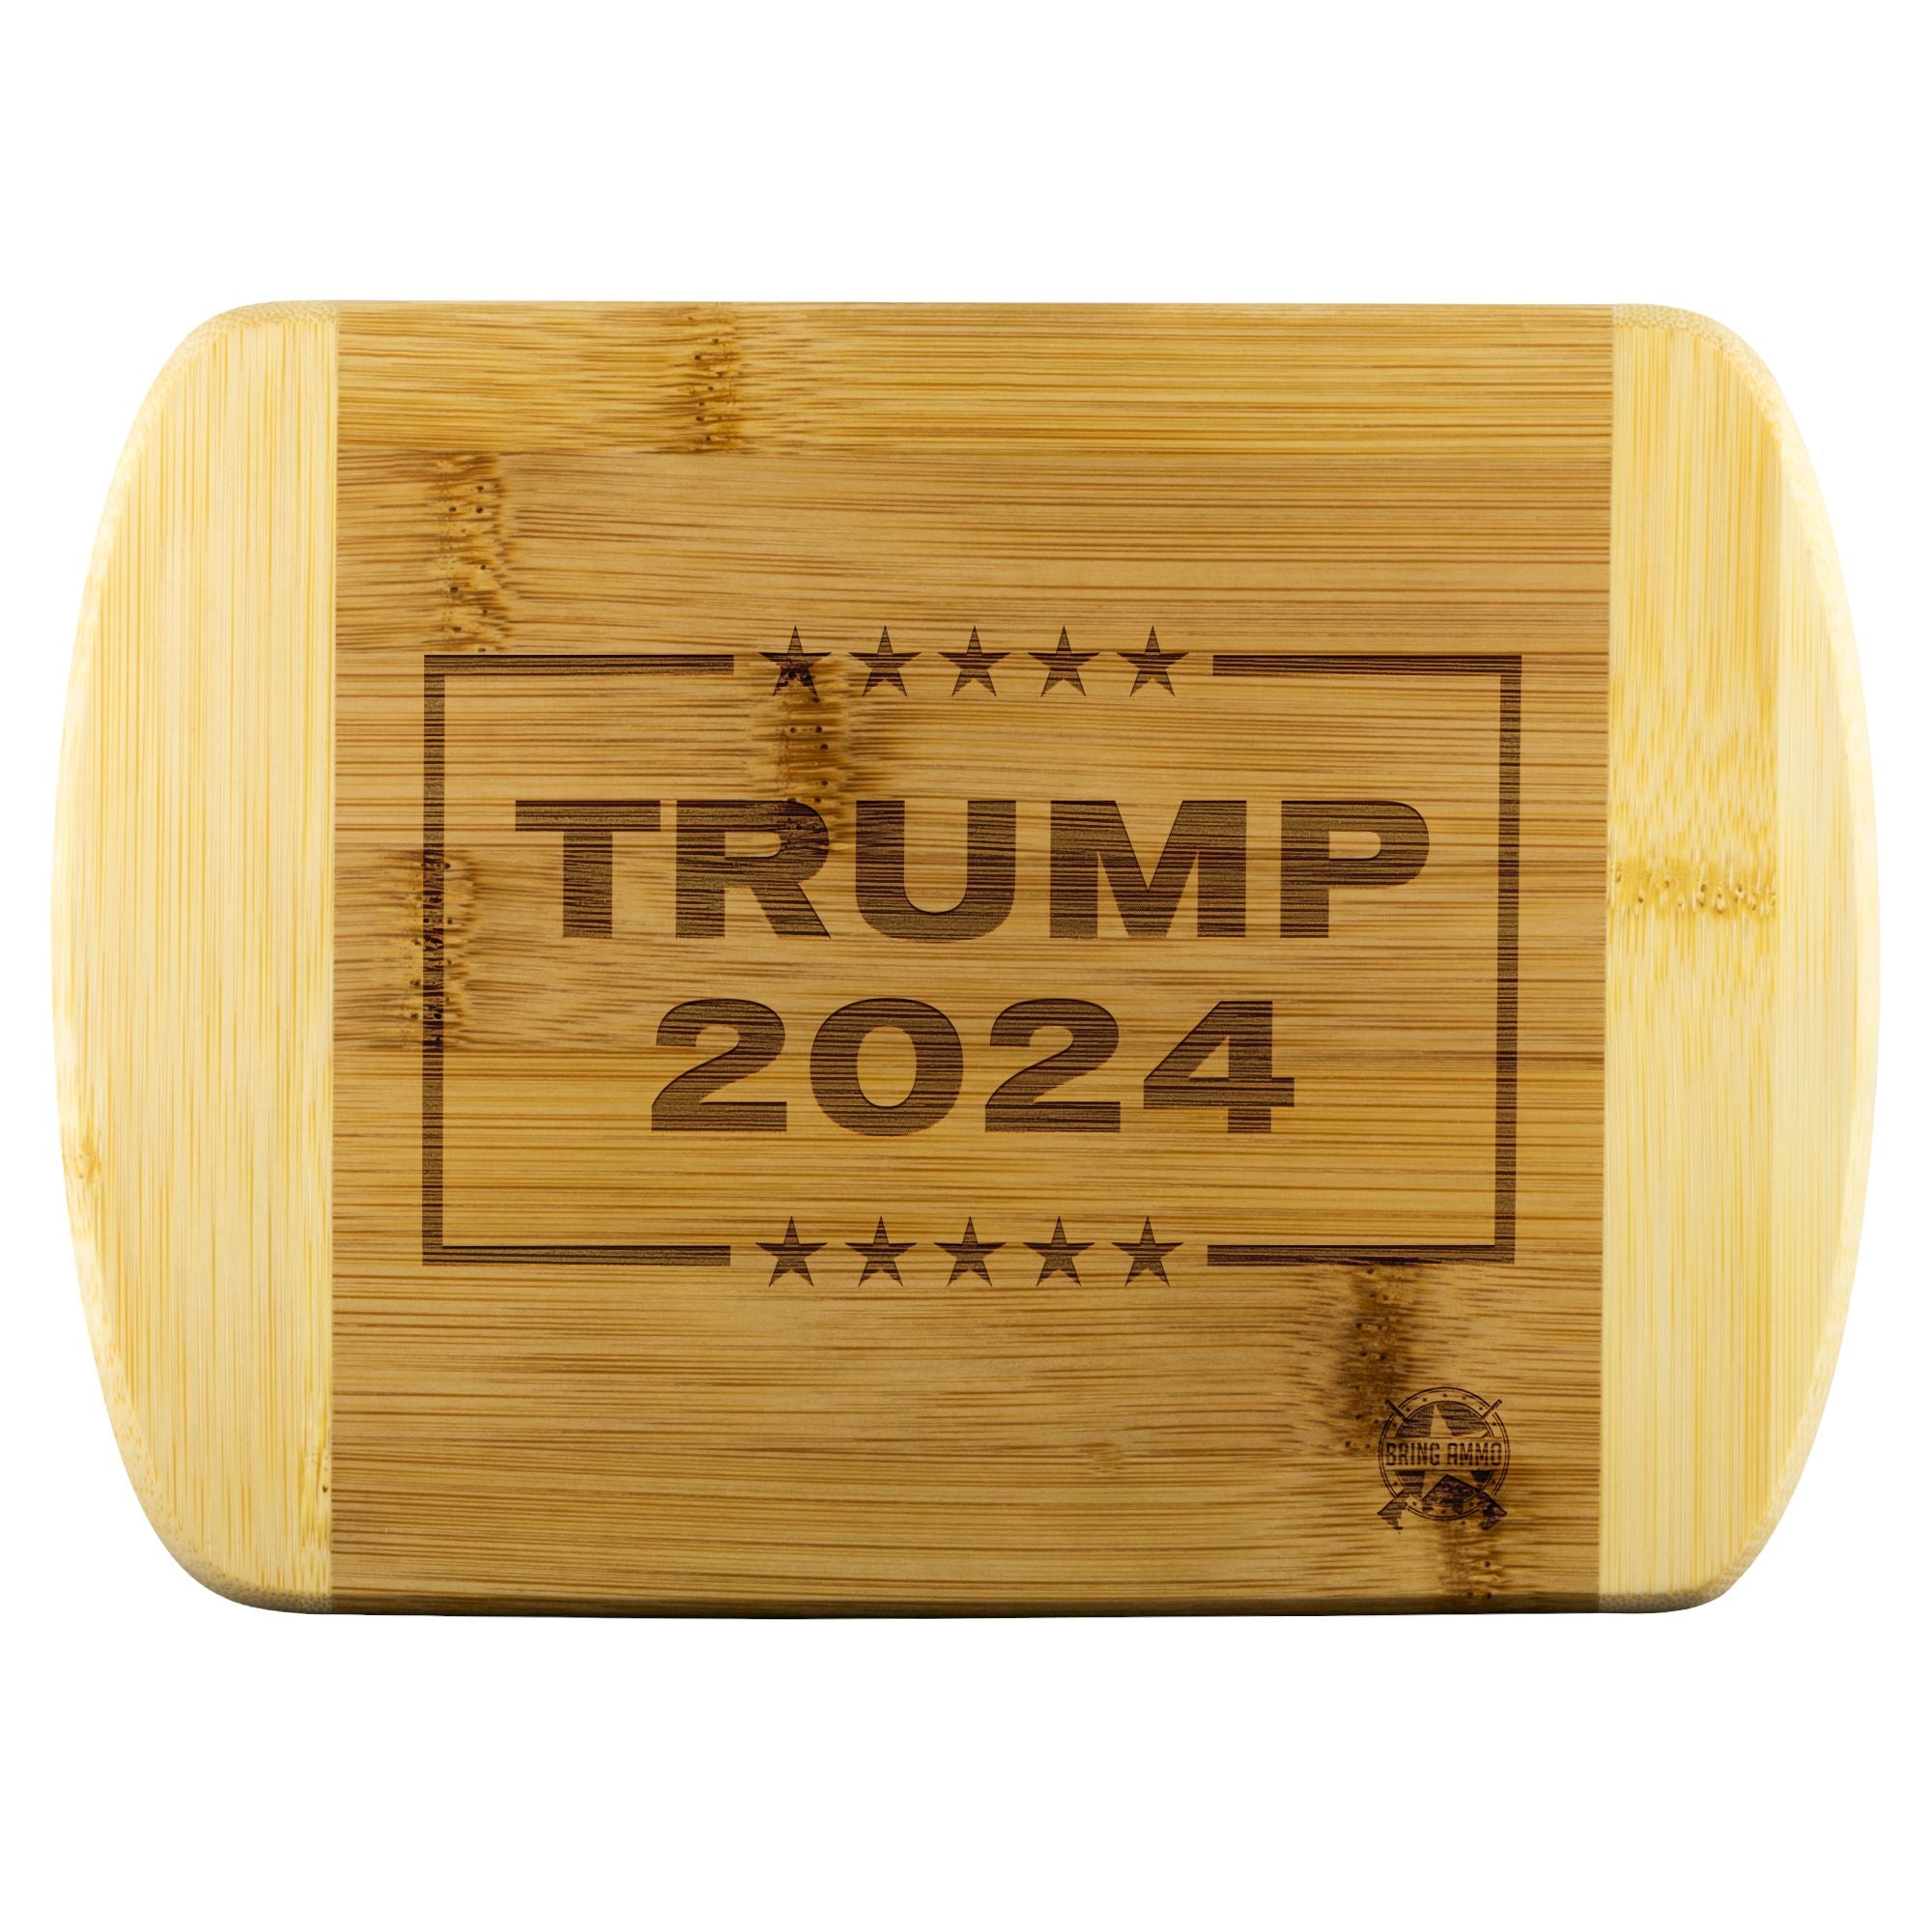 Trump 2024 Engraved Real Wood Cutting Board - MADE IN THE USA! Wood Cutting Boards 11" x 8.5" 